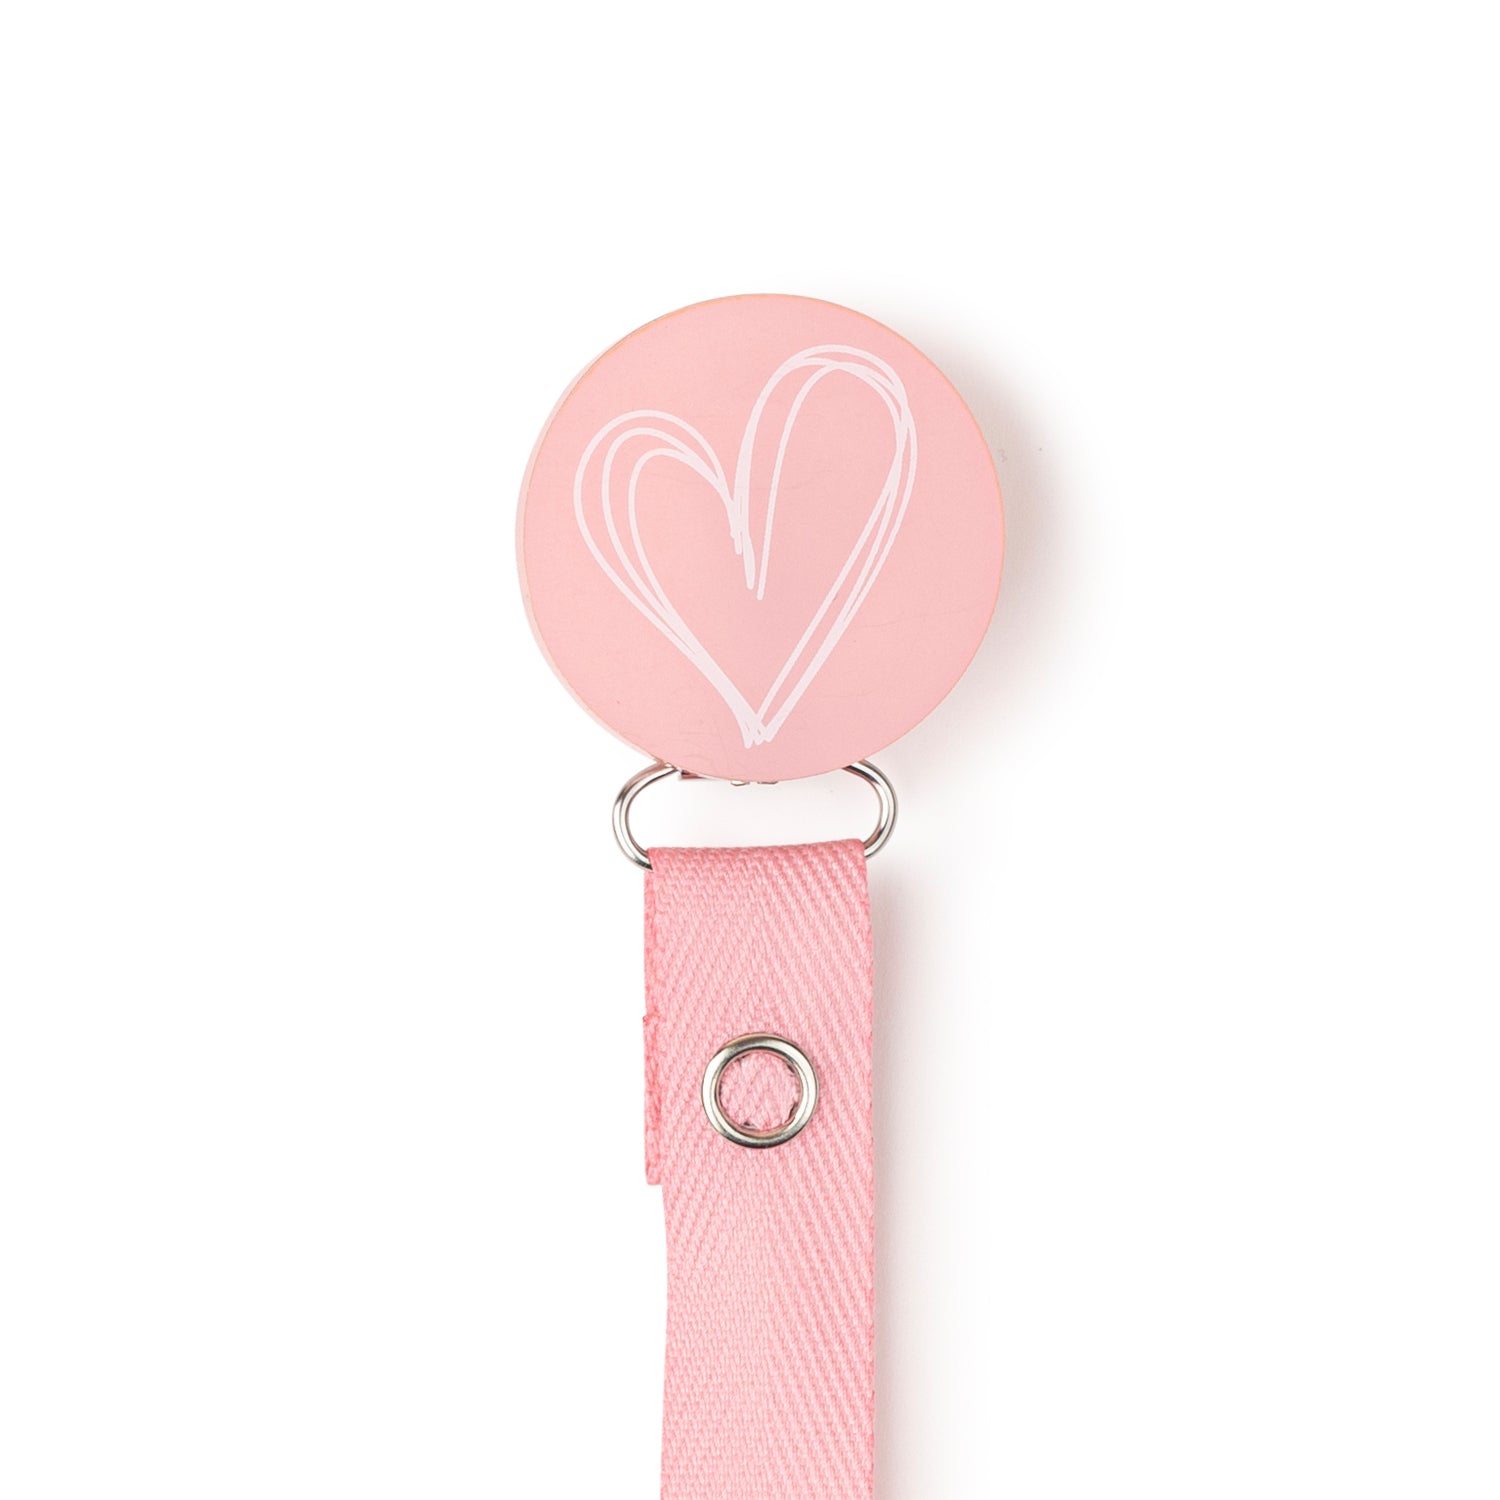 Classy Paci blush pink drawn white heart clip with Bibs pacifier GIFT SET